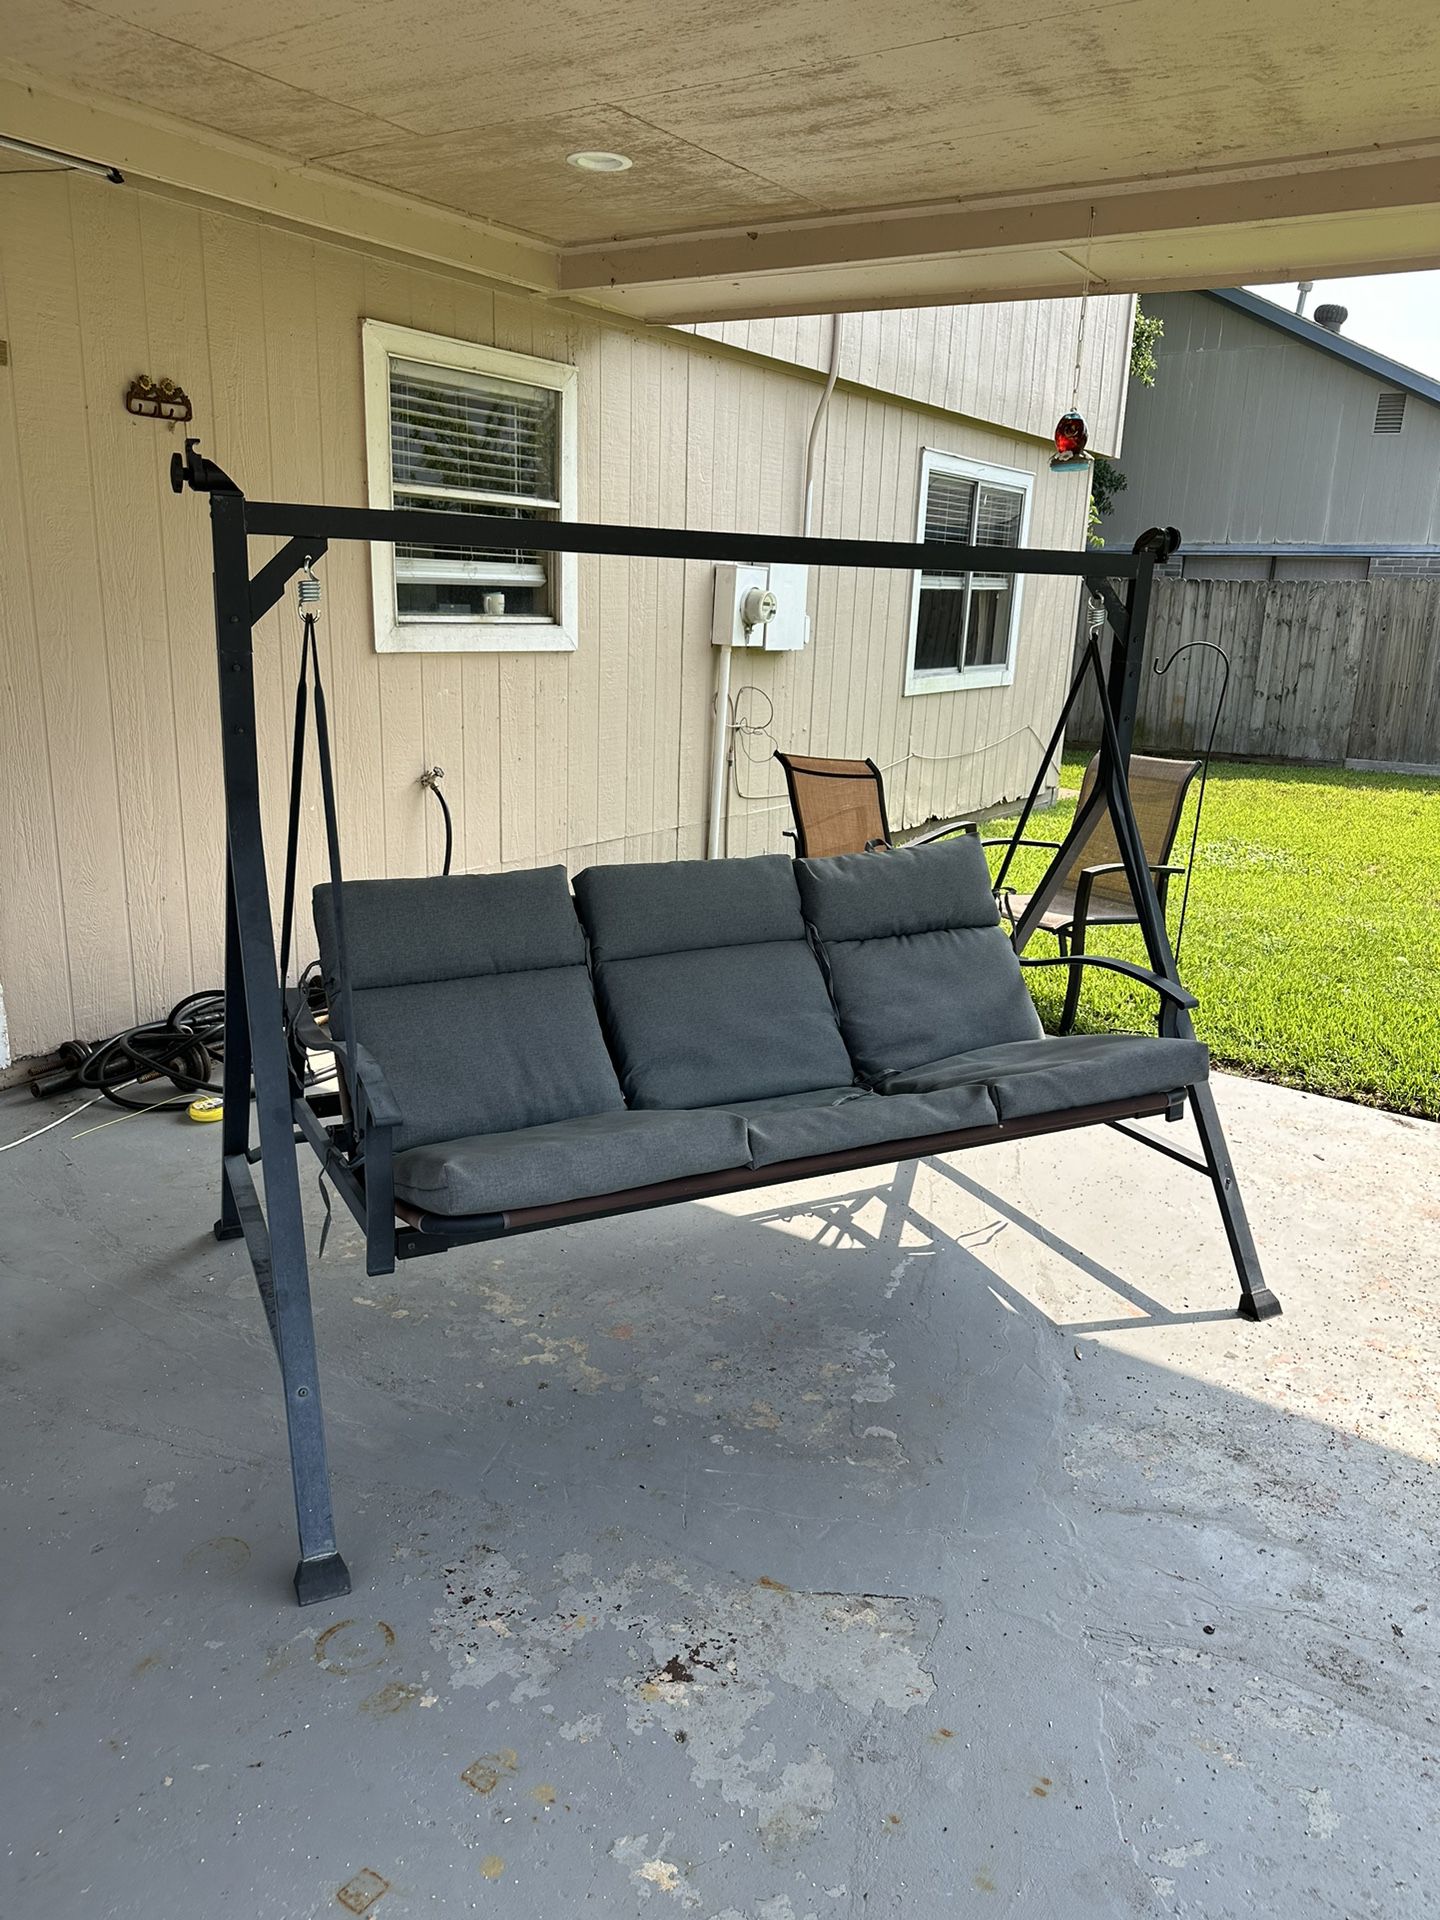 Gray / grey outdoor swing set, good like new condition